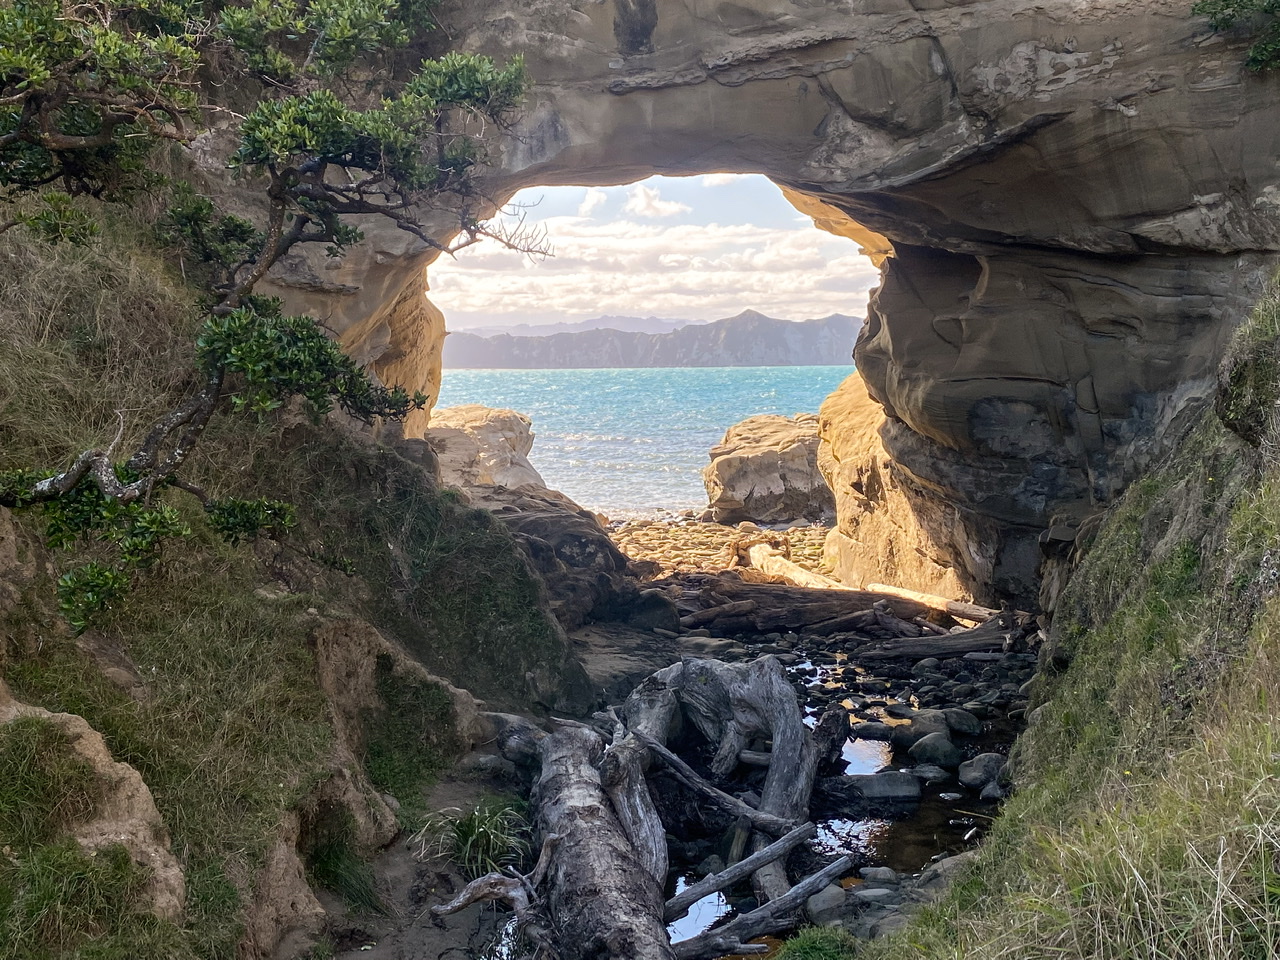 Hole in a rock at cooks cove with Tolaga Bay ocean behind